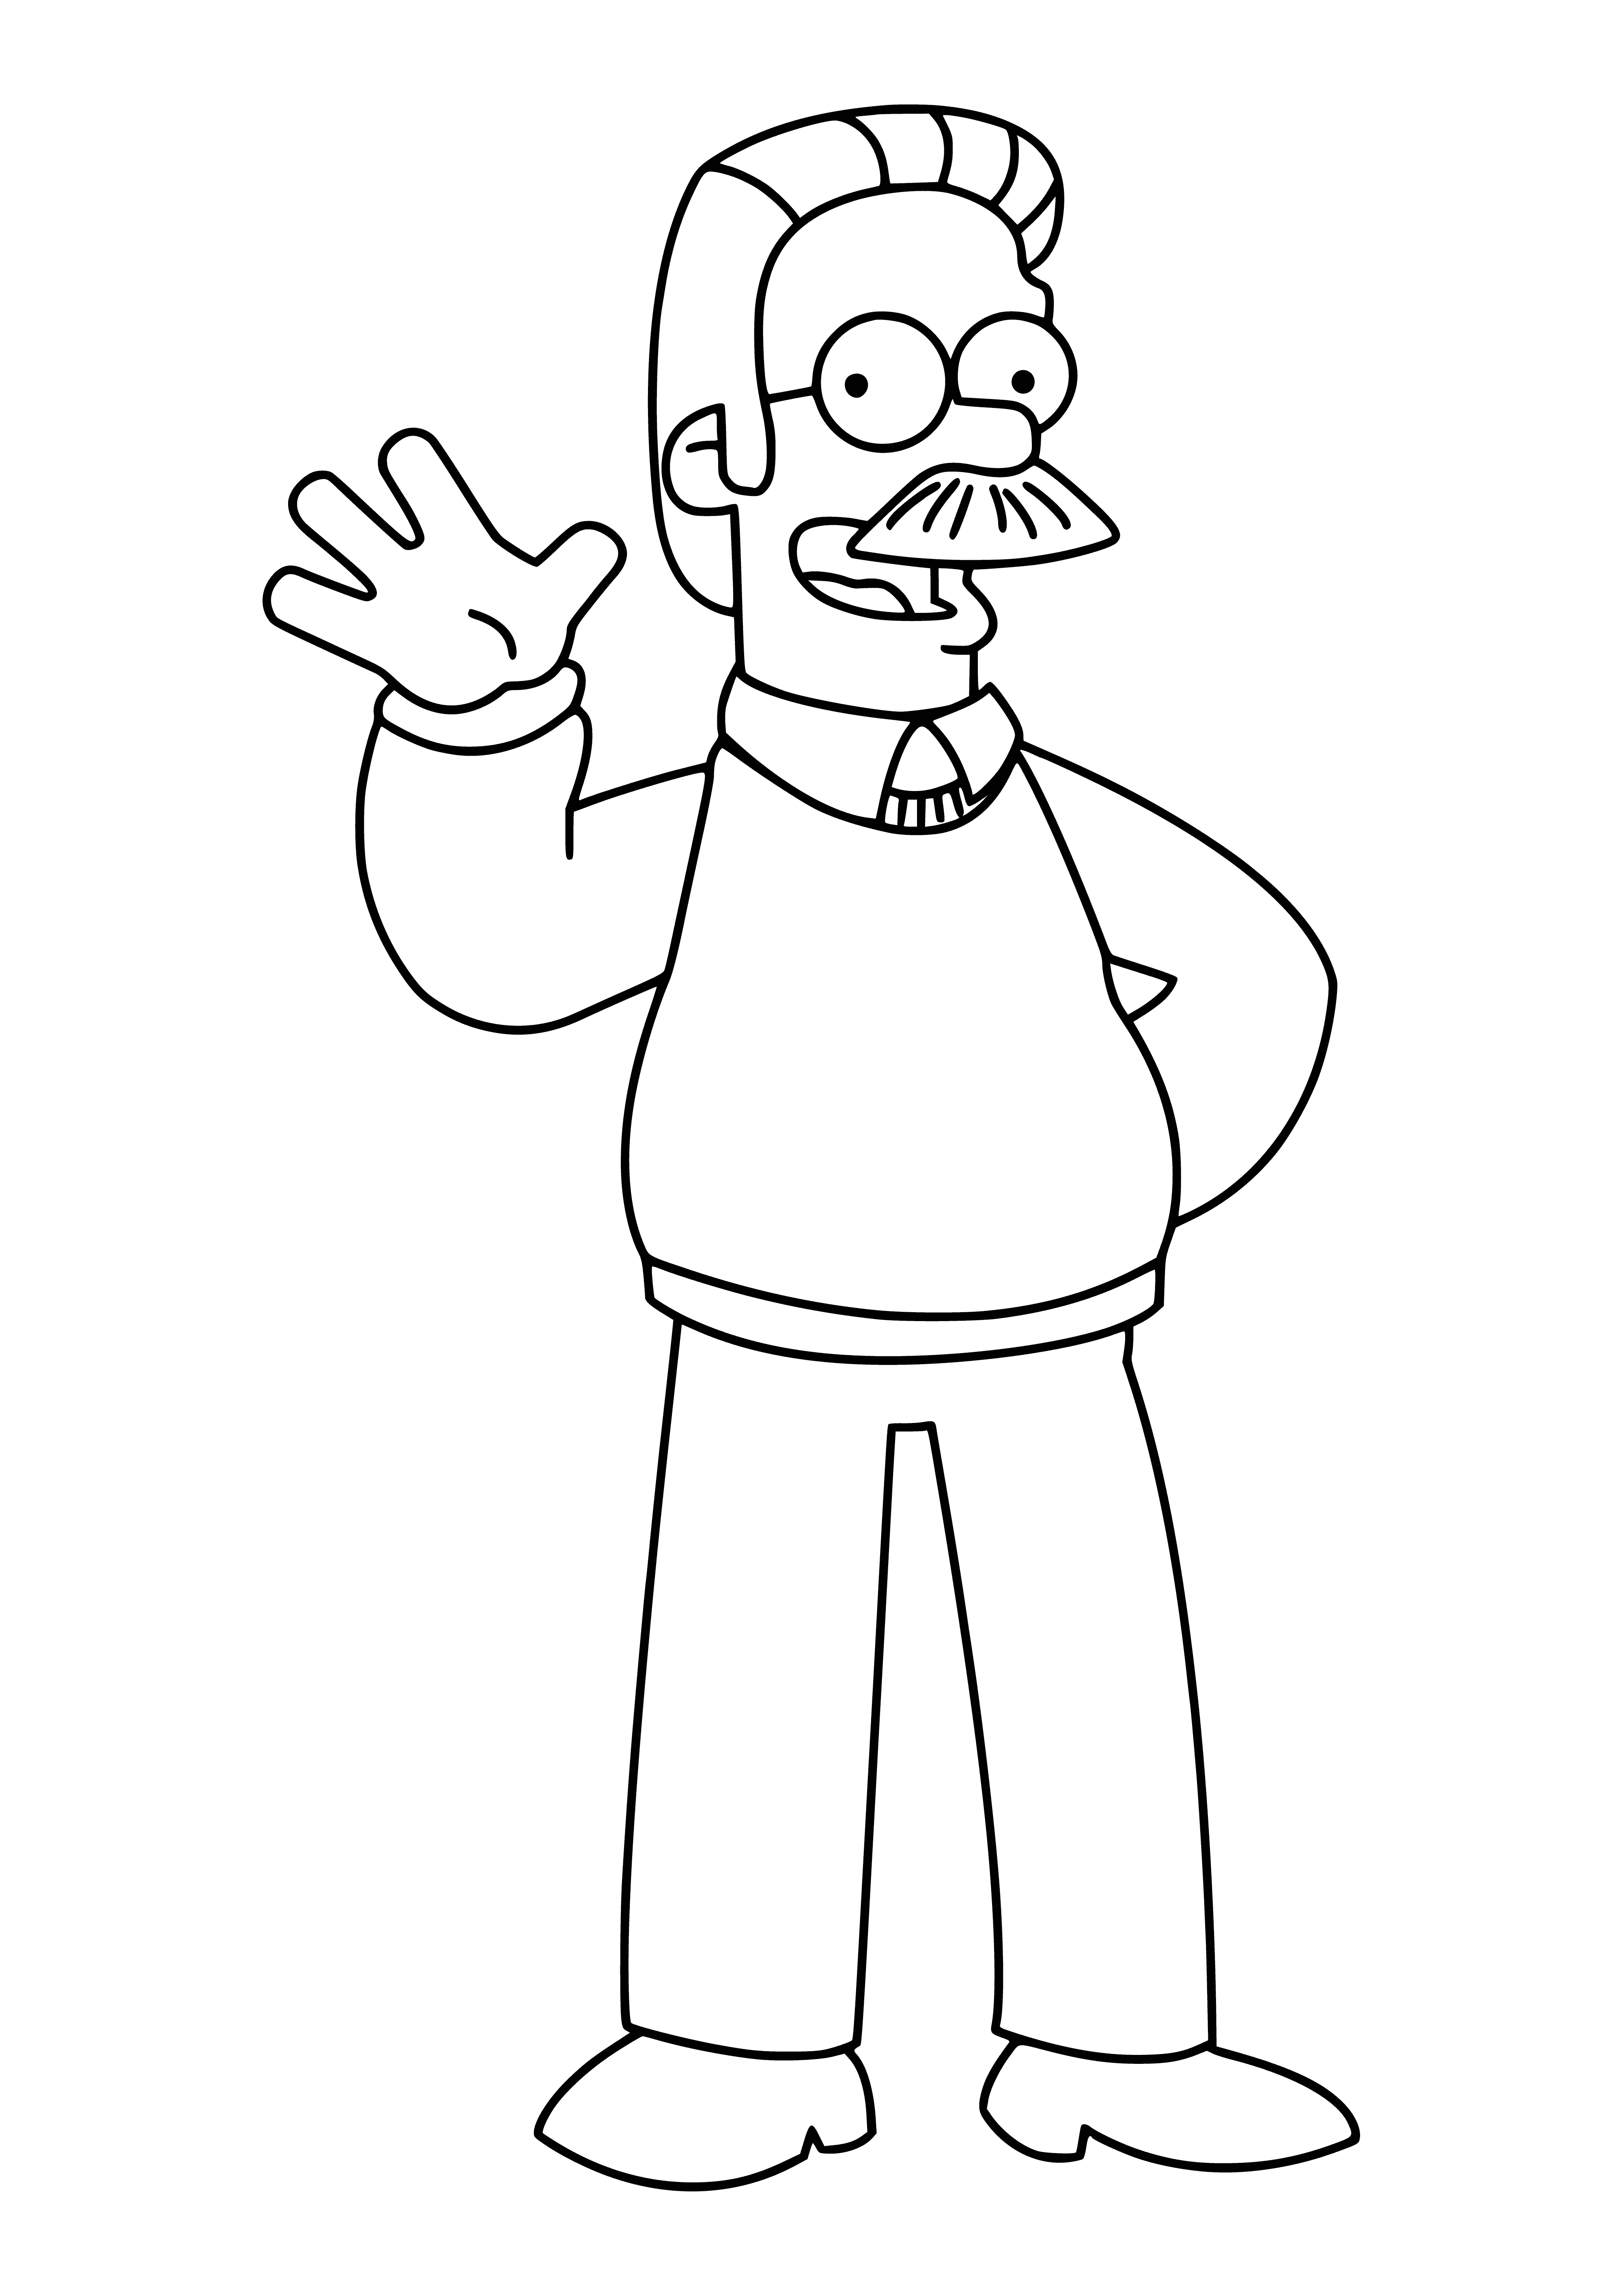 coloring page: Ned Flanders is a middle-aged man with short, light brown hair, big nose, thin lips, wearing a green sweater and khakis, standing in front of a white house with green trim and a duck-shaped mailbox in the yard.